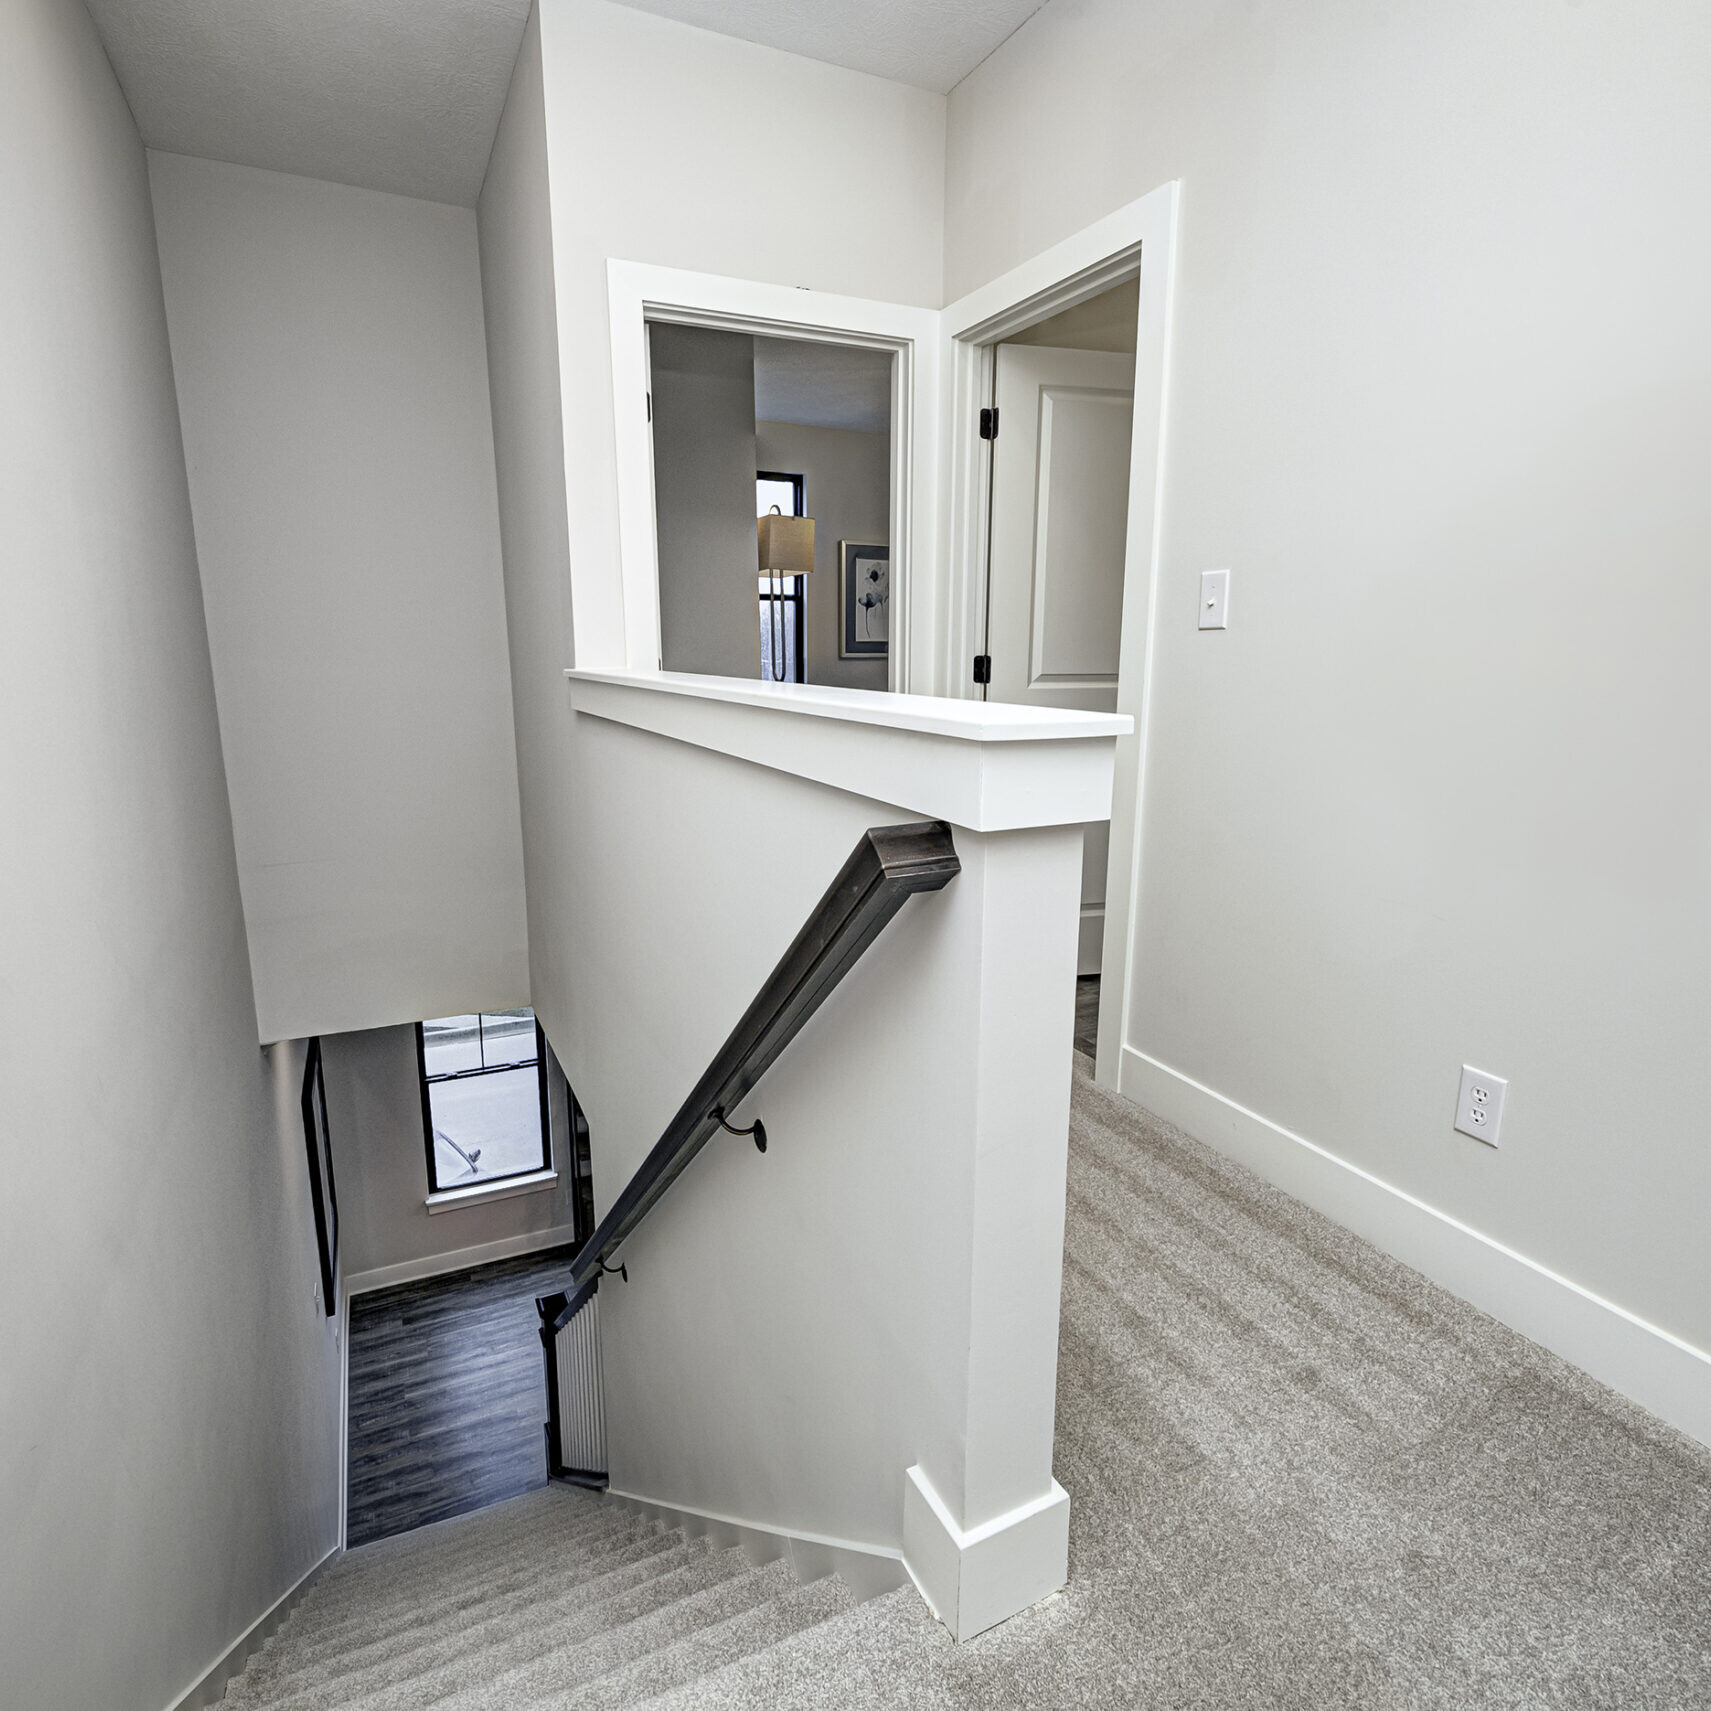 A custom-built stairway leading to a bedroom in a new home.